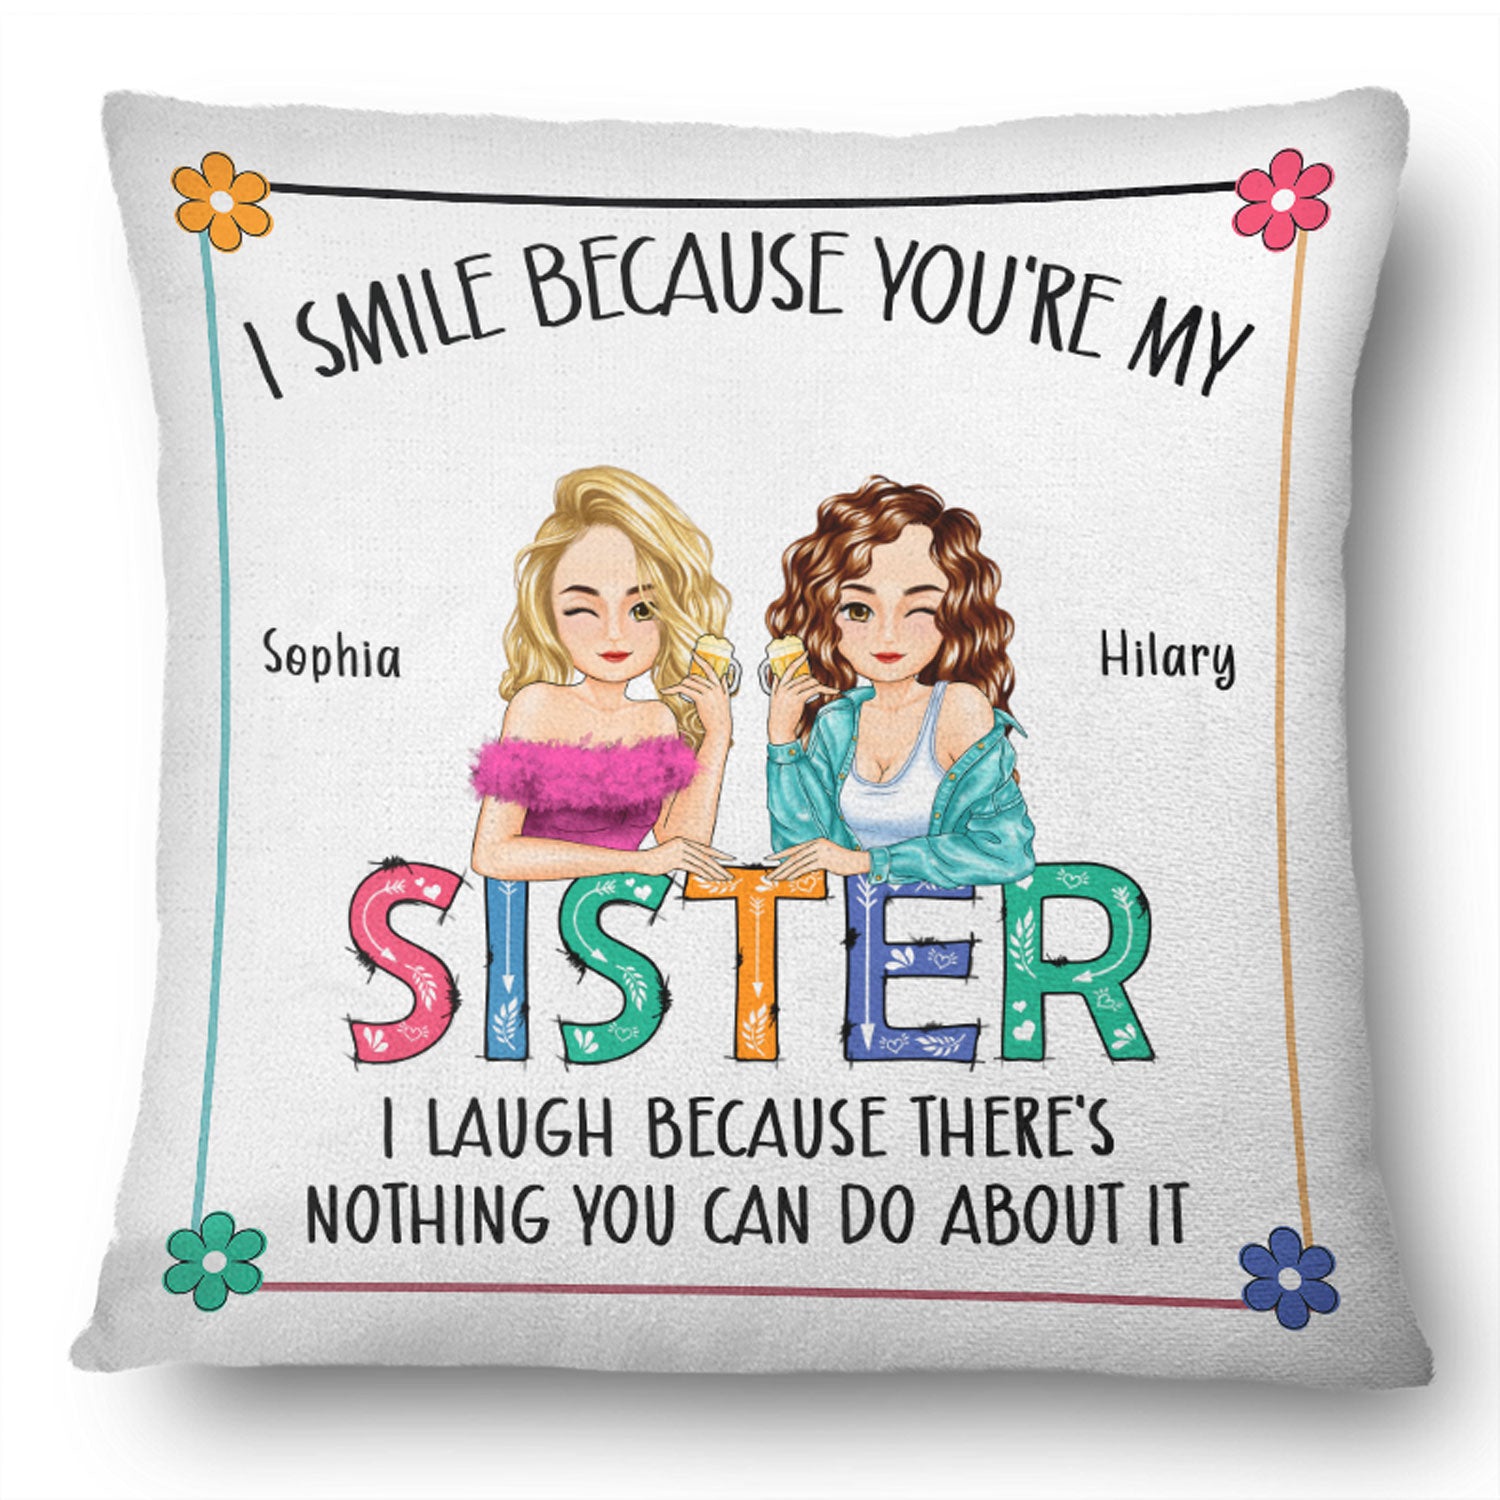 I Smile Because You Are My Sister - Gift For Sister - Personalized Pillow